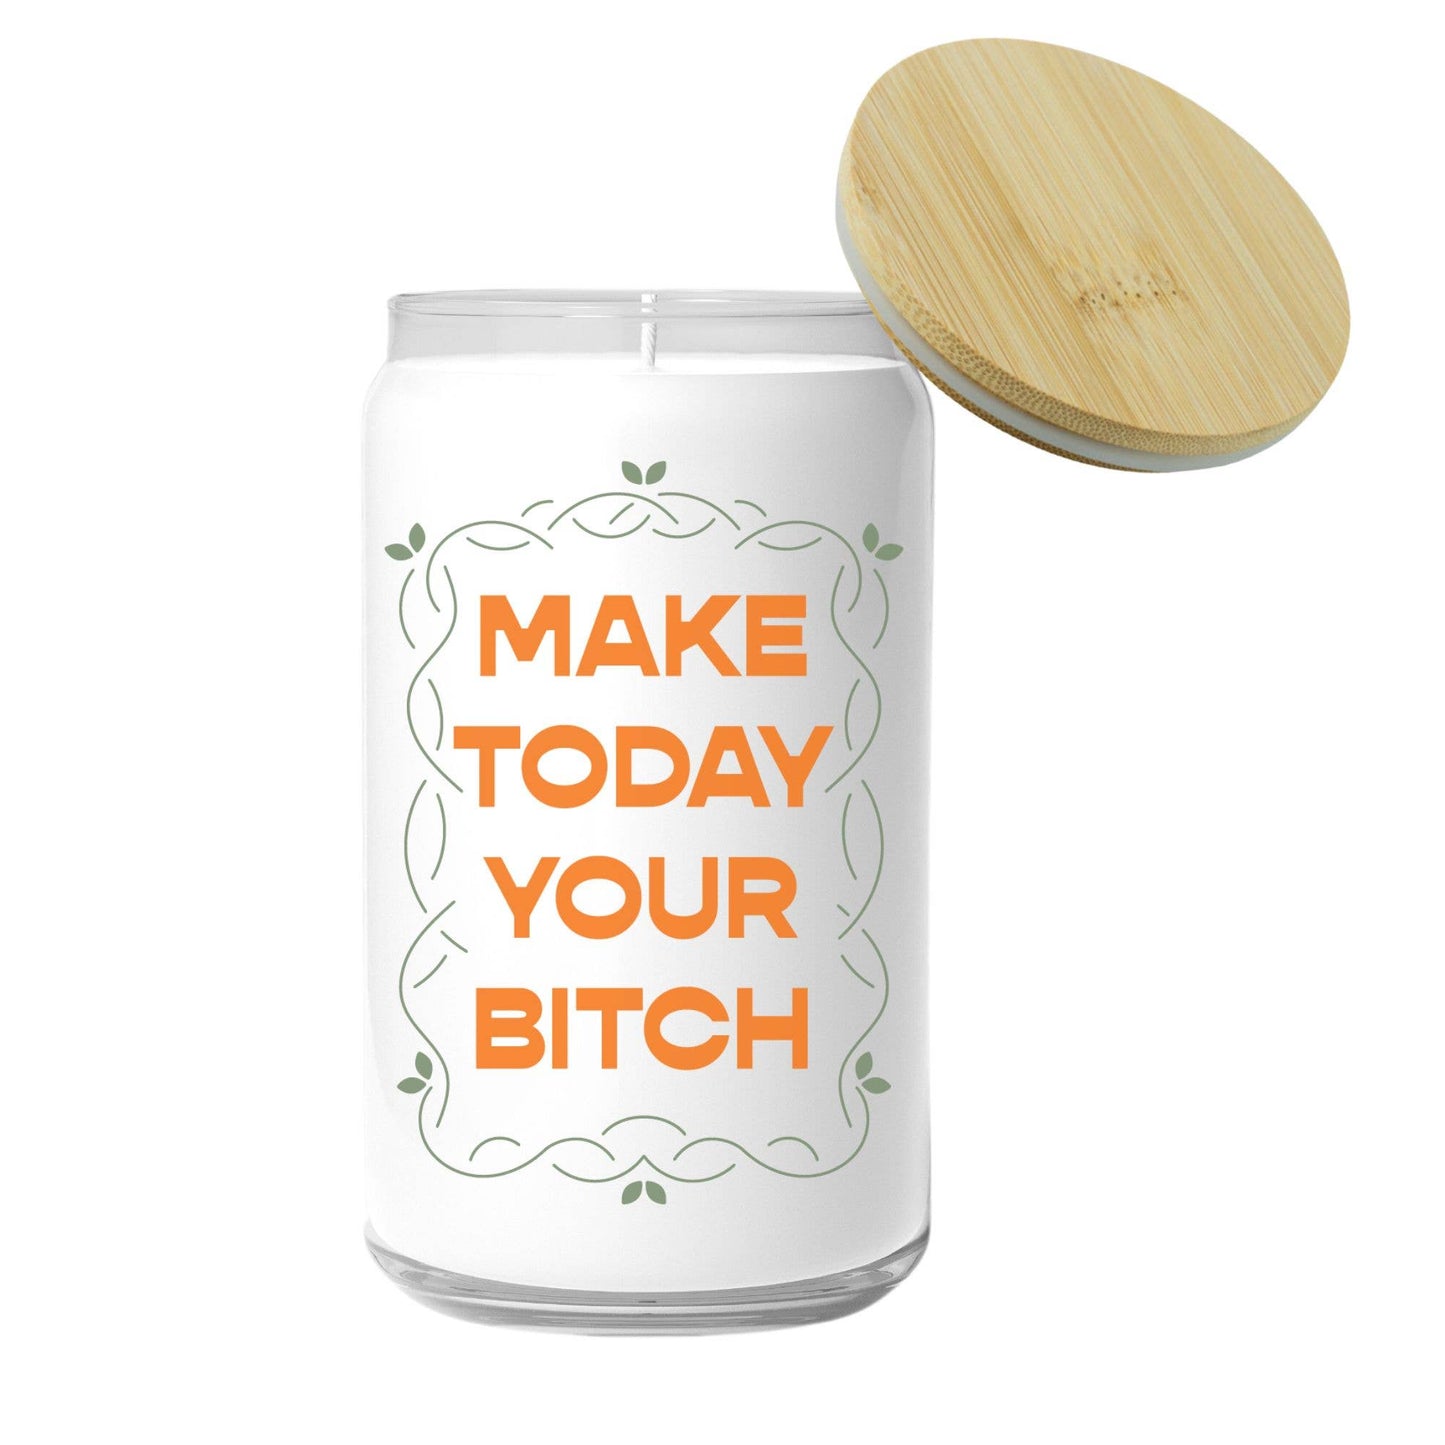 Make Today Your Bitch Candle (funny, gift)